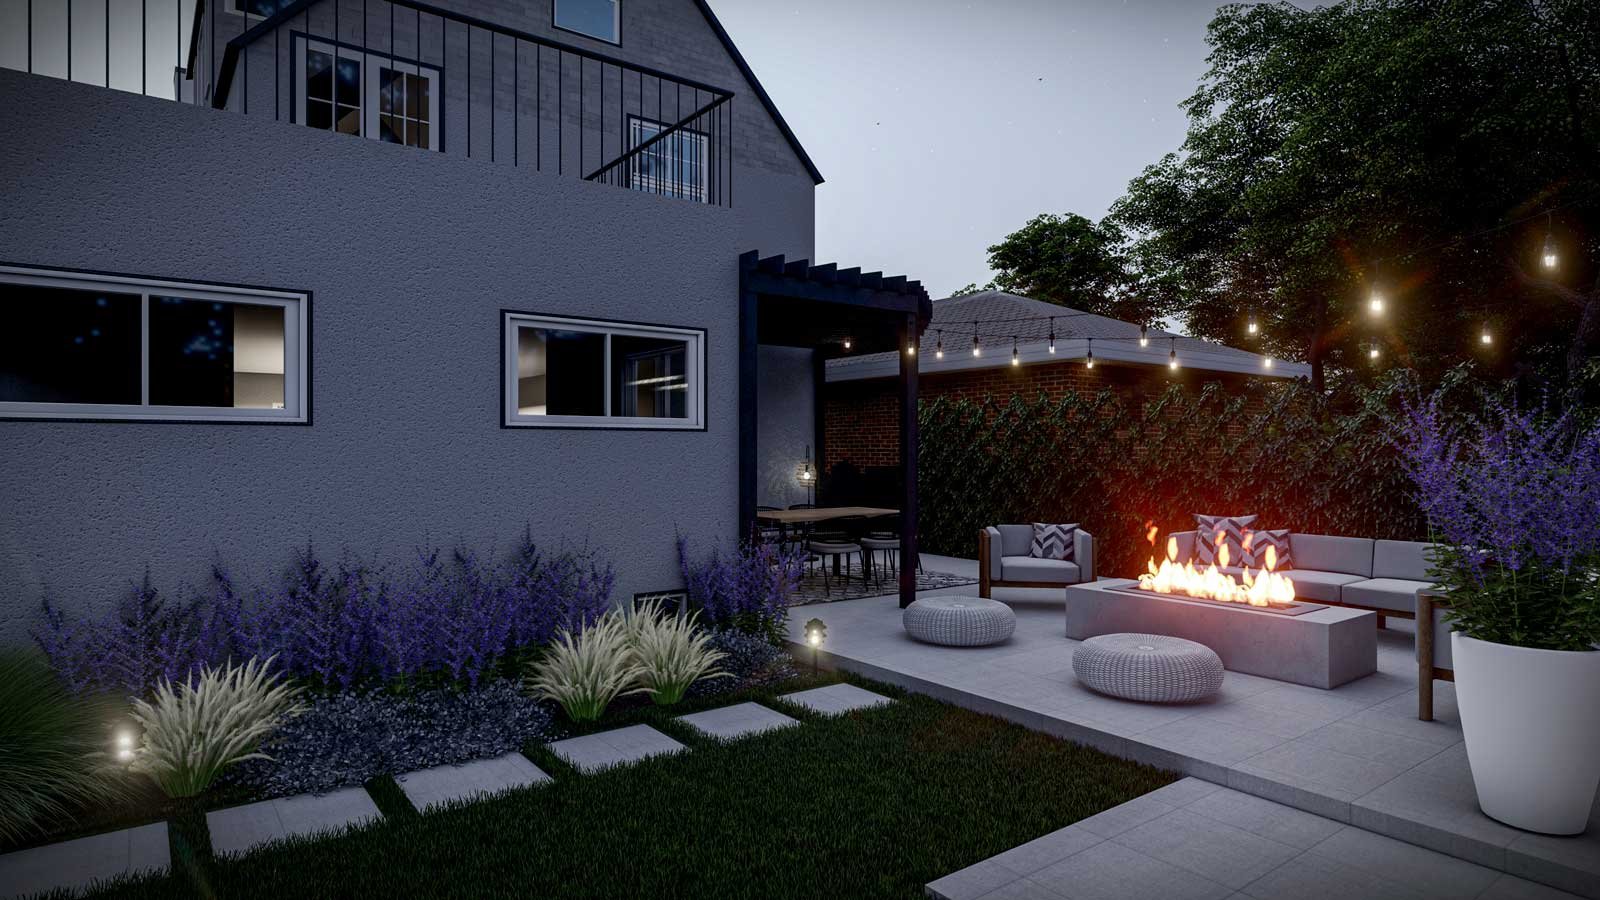 Backyard with dining area, path lights, plants, firepit with seating area, and hanging lights